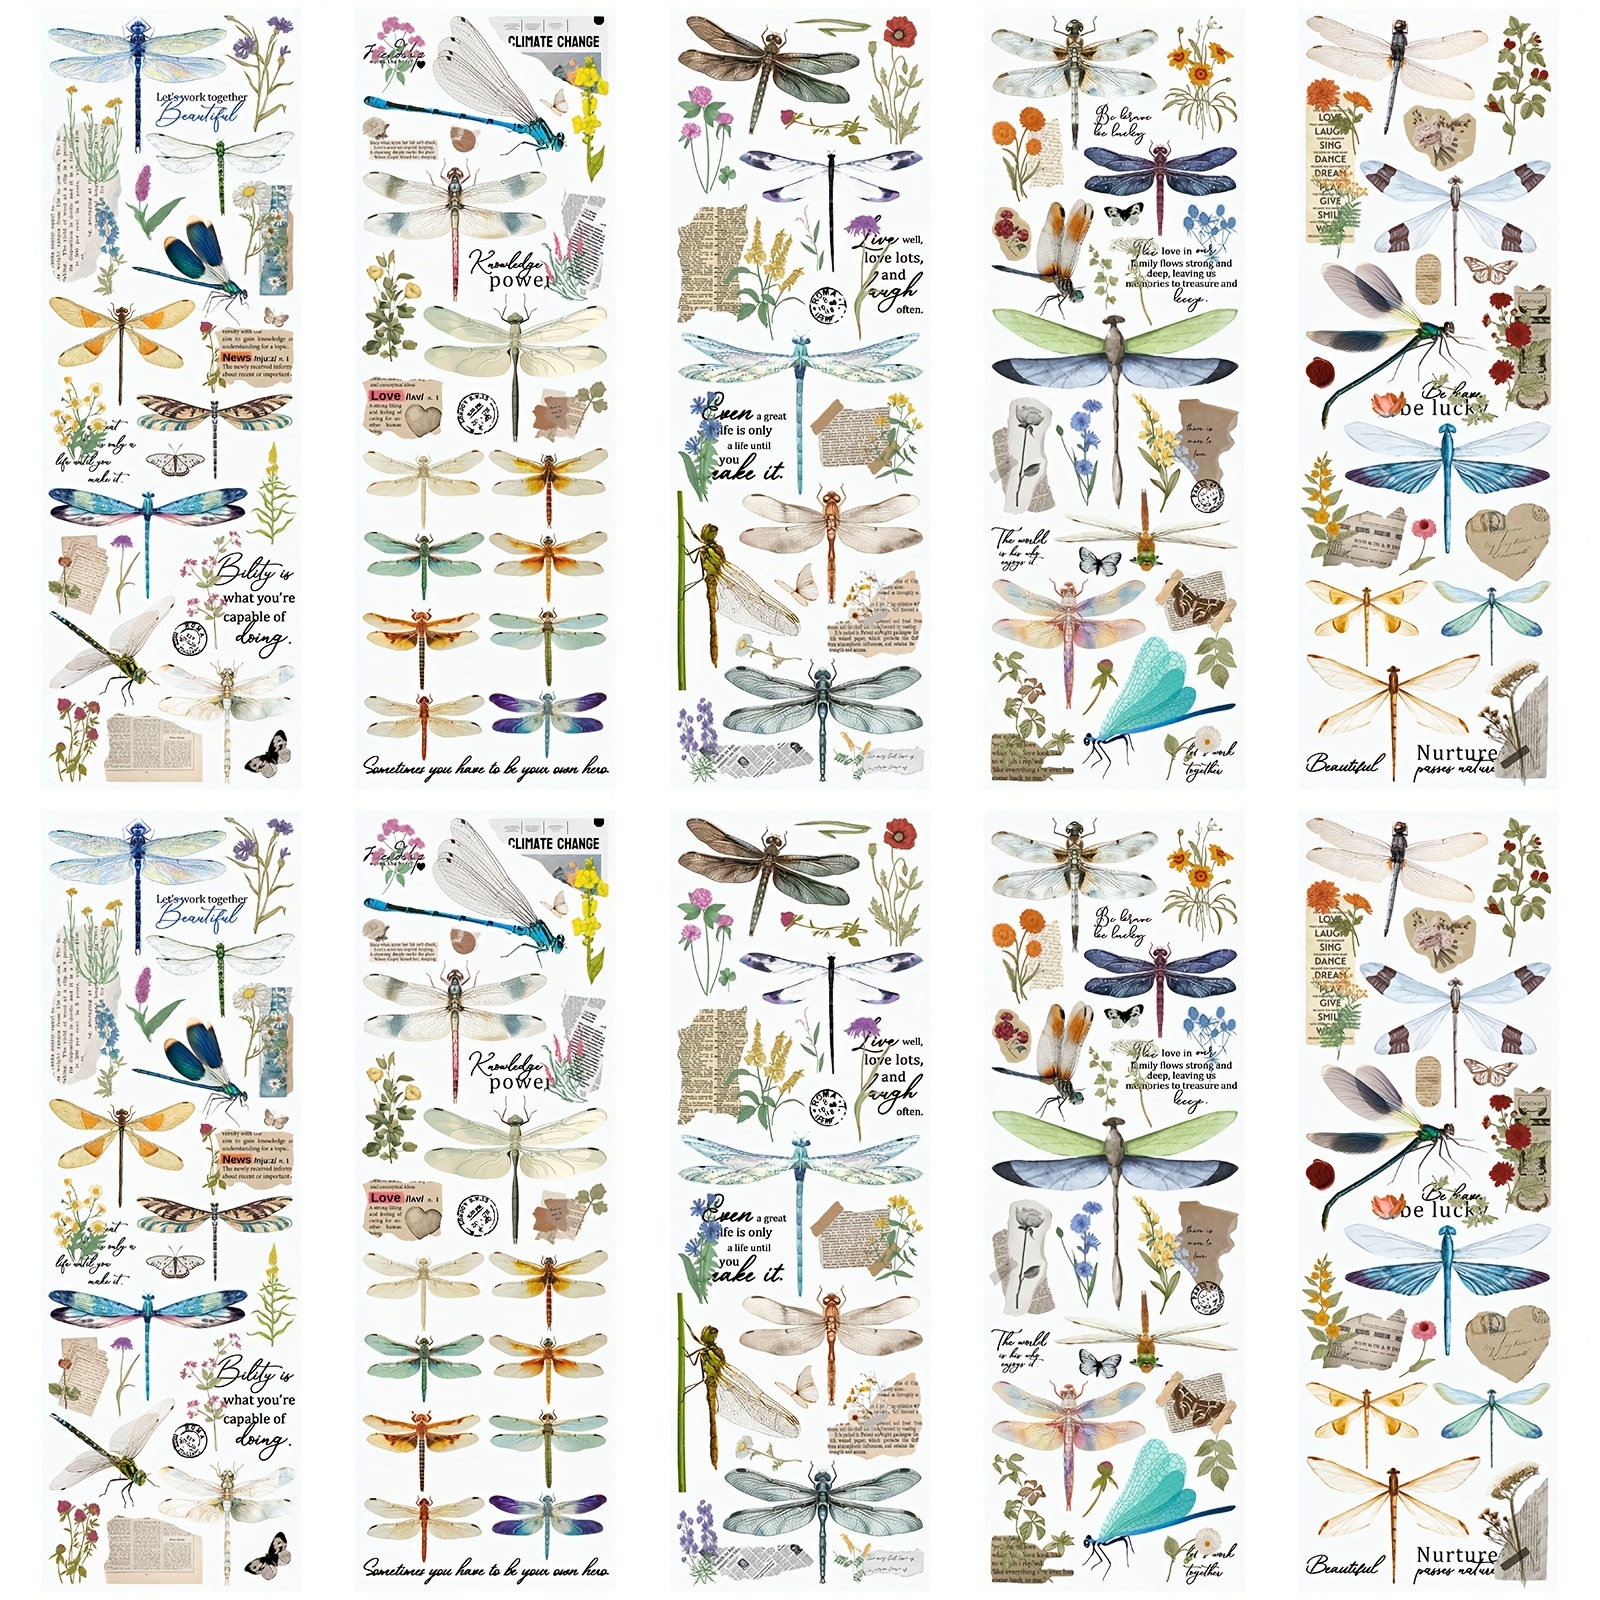 

Dragonfly & Floral Design Transfer Stickers - 10 Sheets, Easy Apply For Diy Scrapbooking, Photo Albums & Crafts, 11.8 X 3.9 Inches